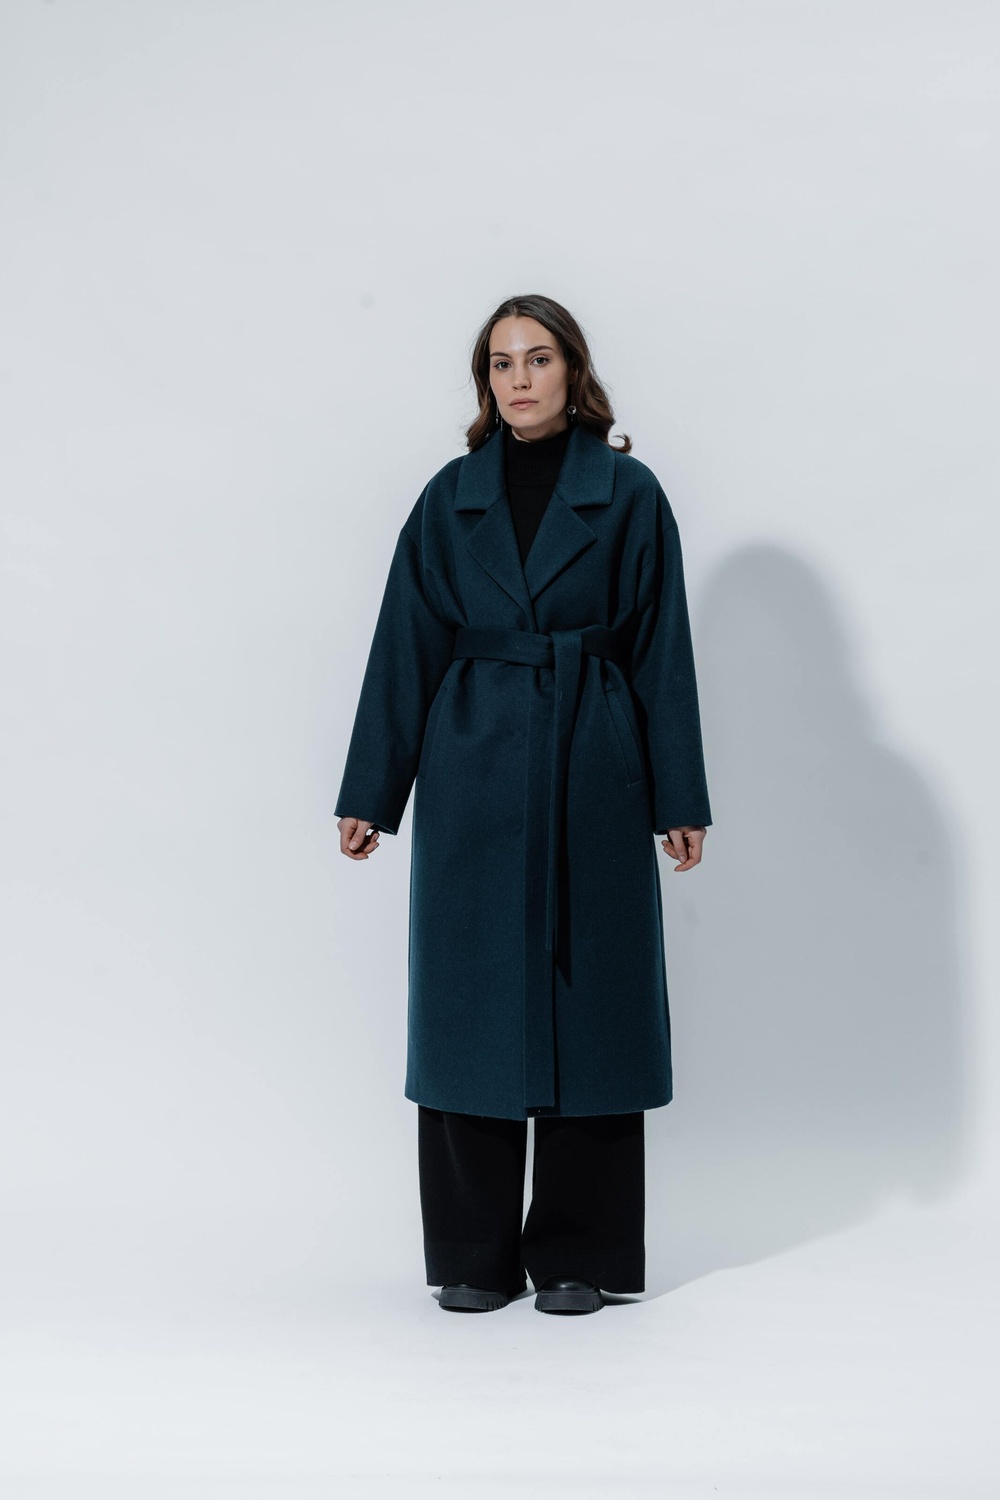 Velvety wool thin coat with a small pile color of sea wave